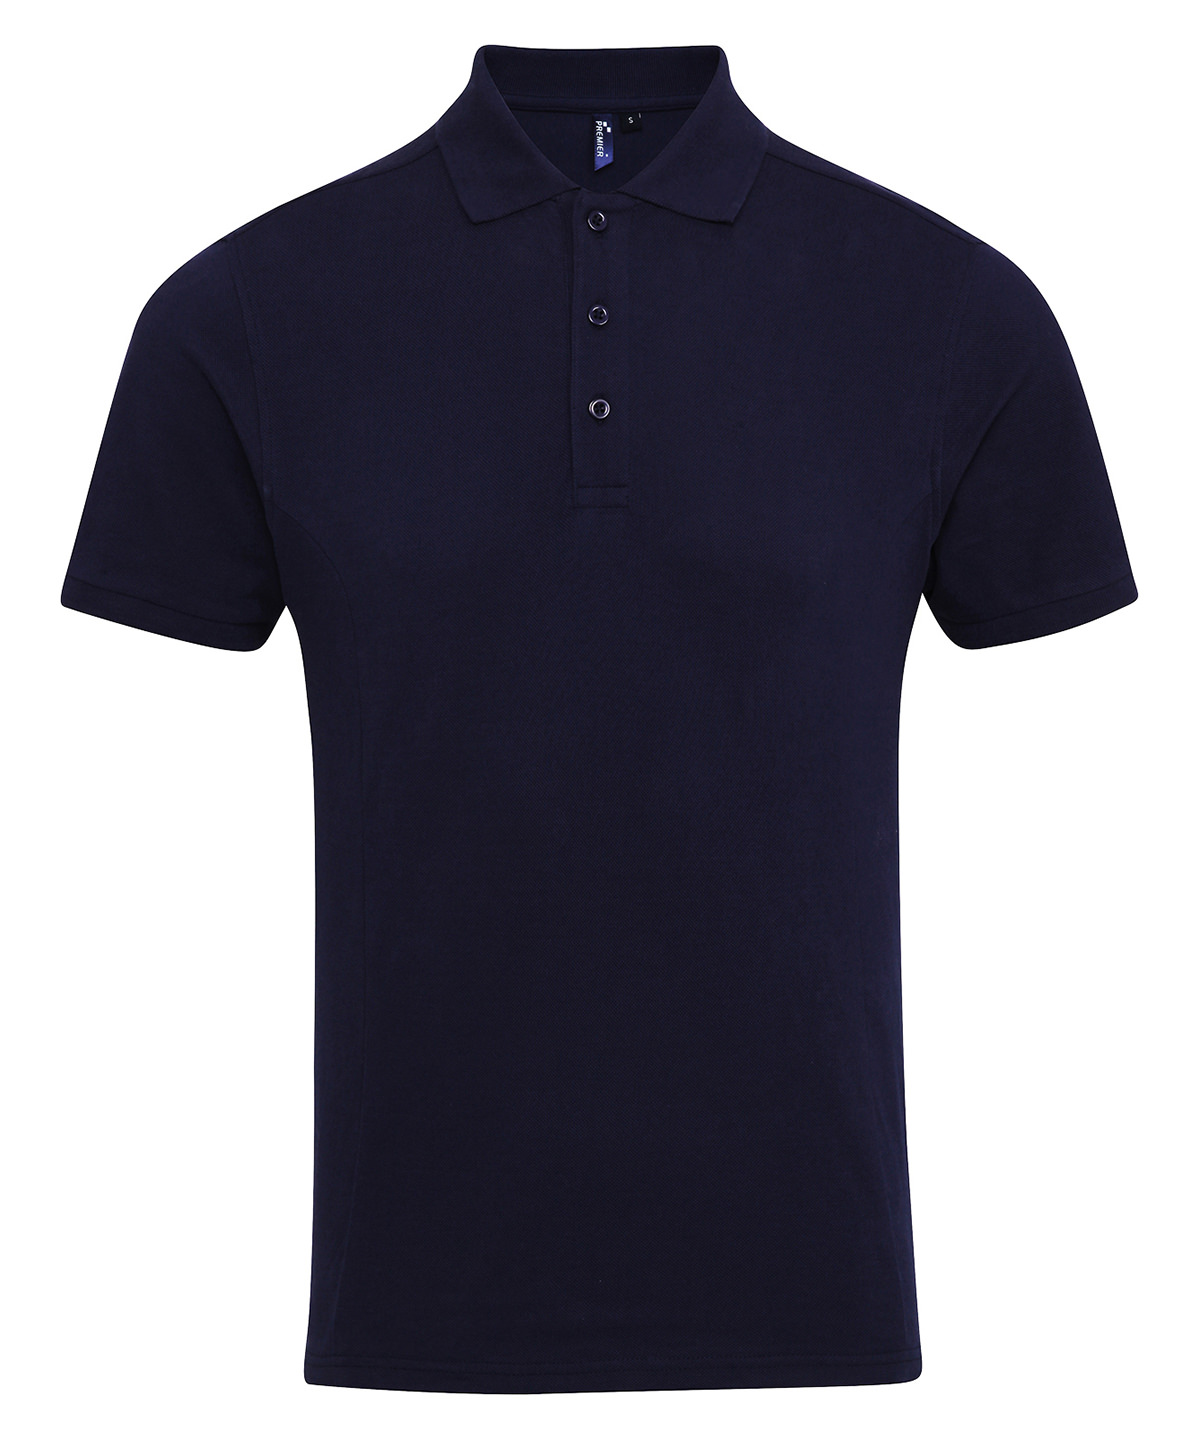 Antimicrobial polo shirt-pr630_navy_ft